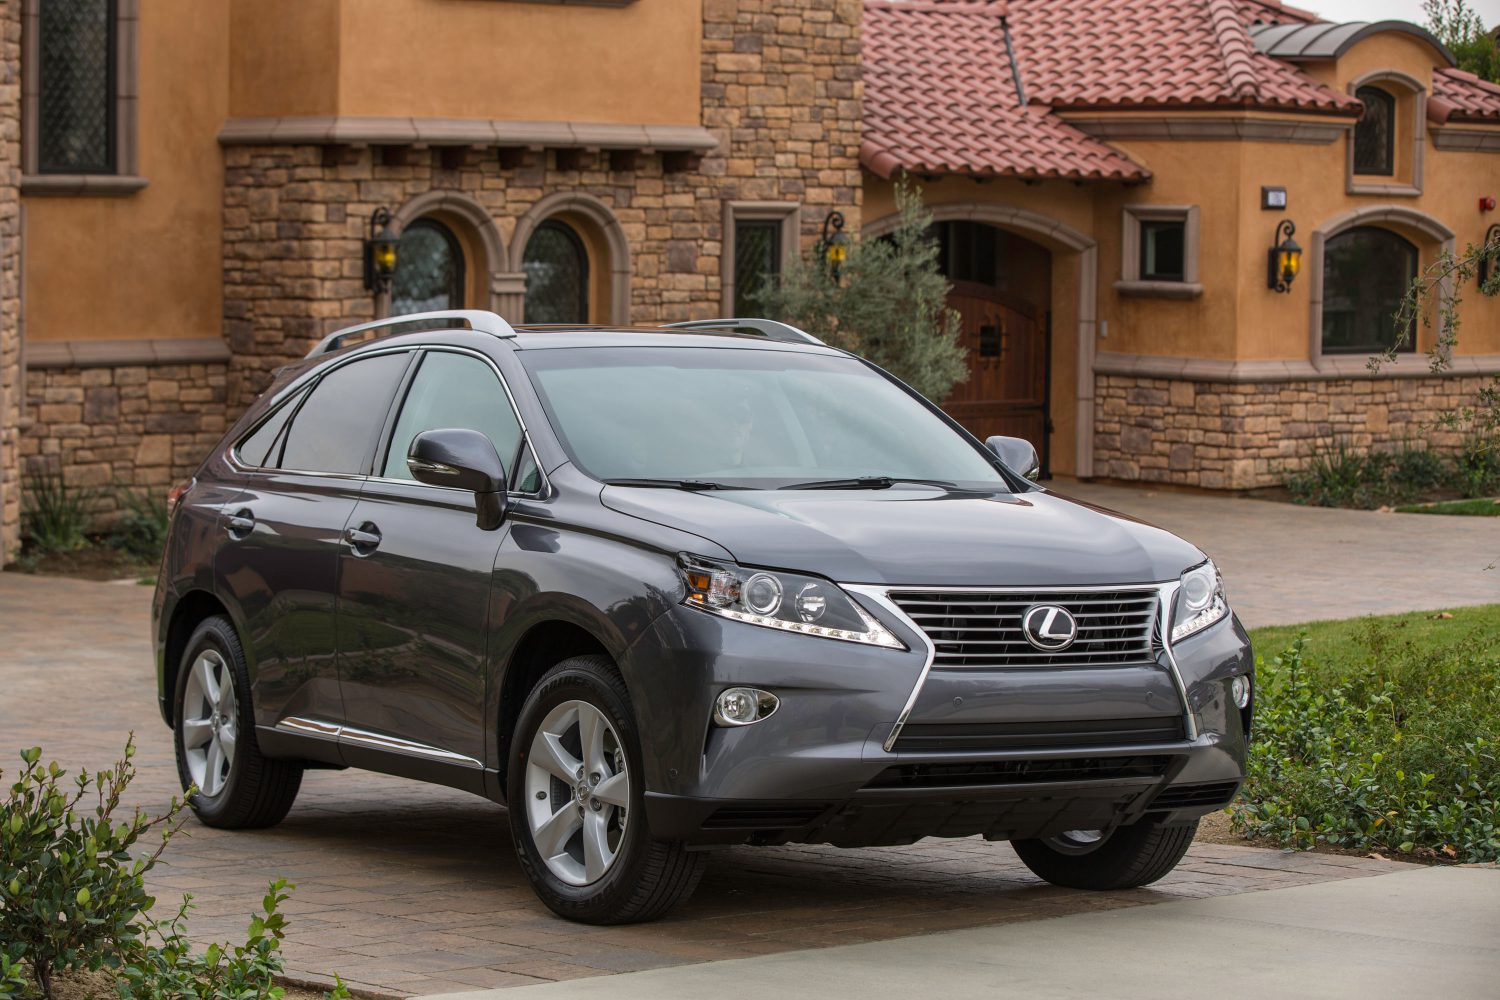 Reliable Toyota SUVs under $25,000 include this Lexus RX